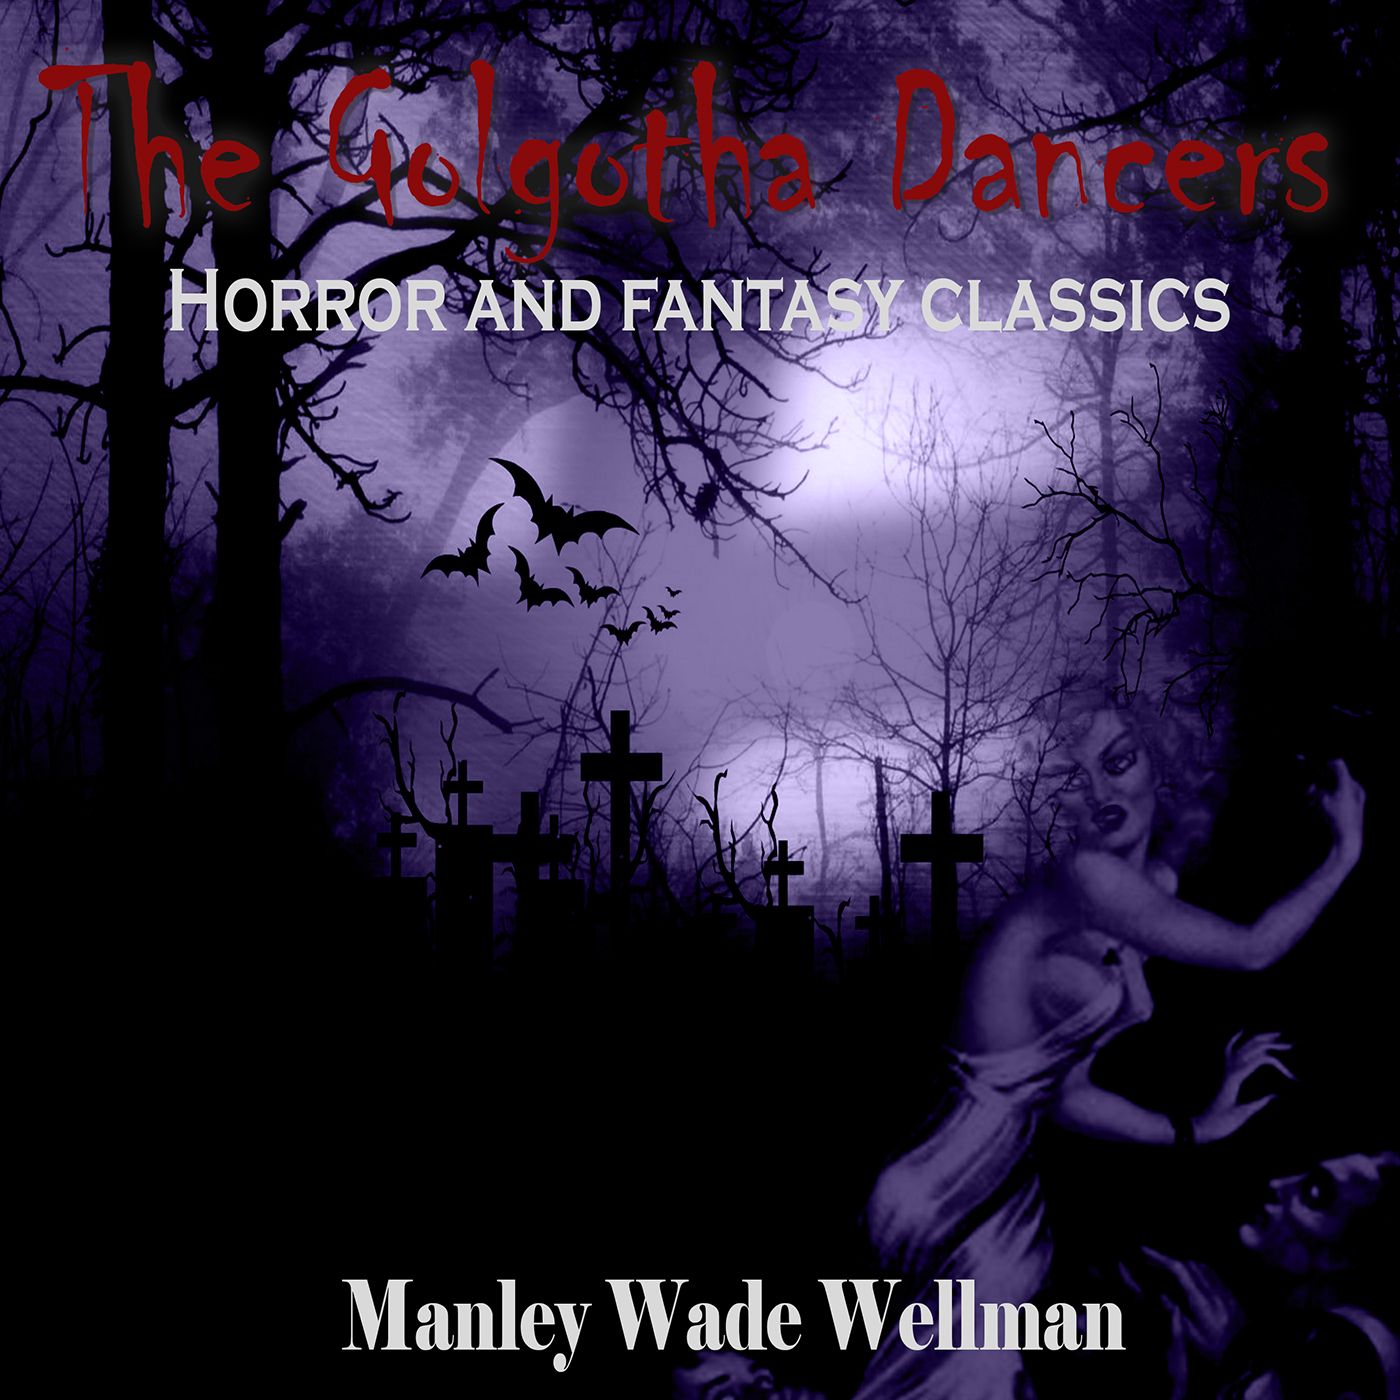 The Golgotha Dancers, audiobook by Manly Wade Wellman